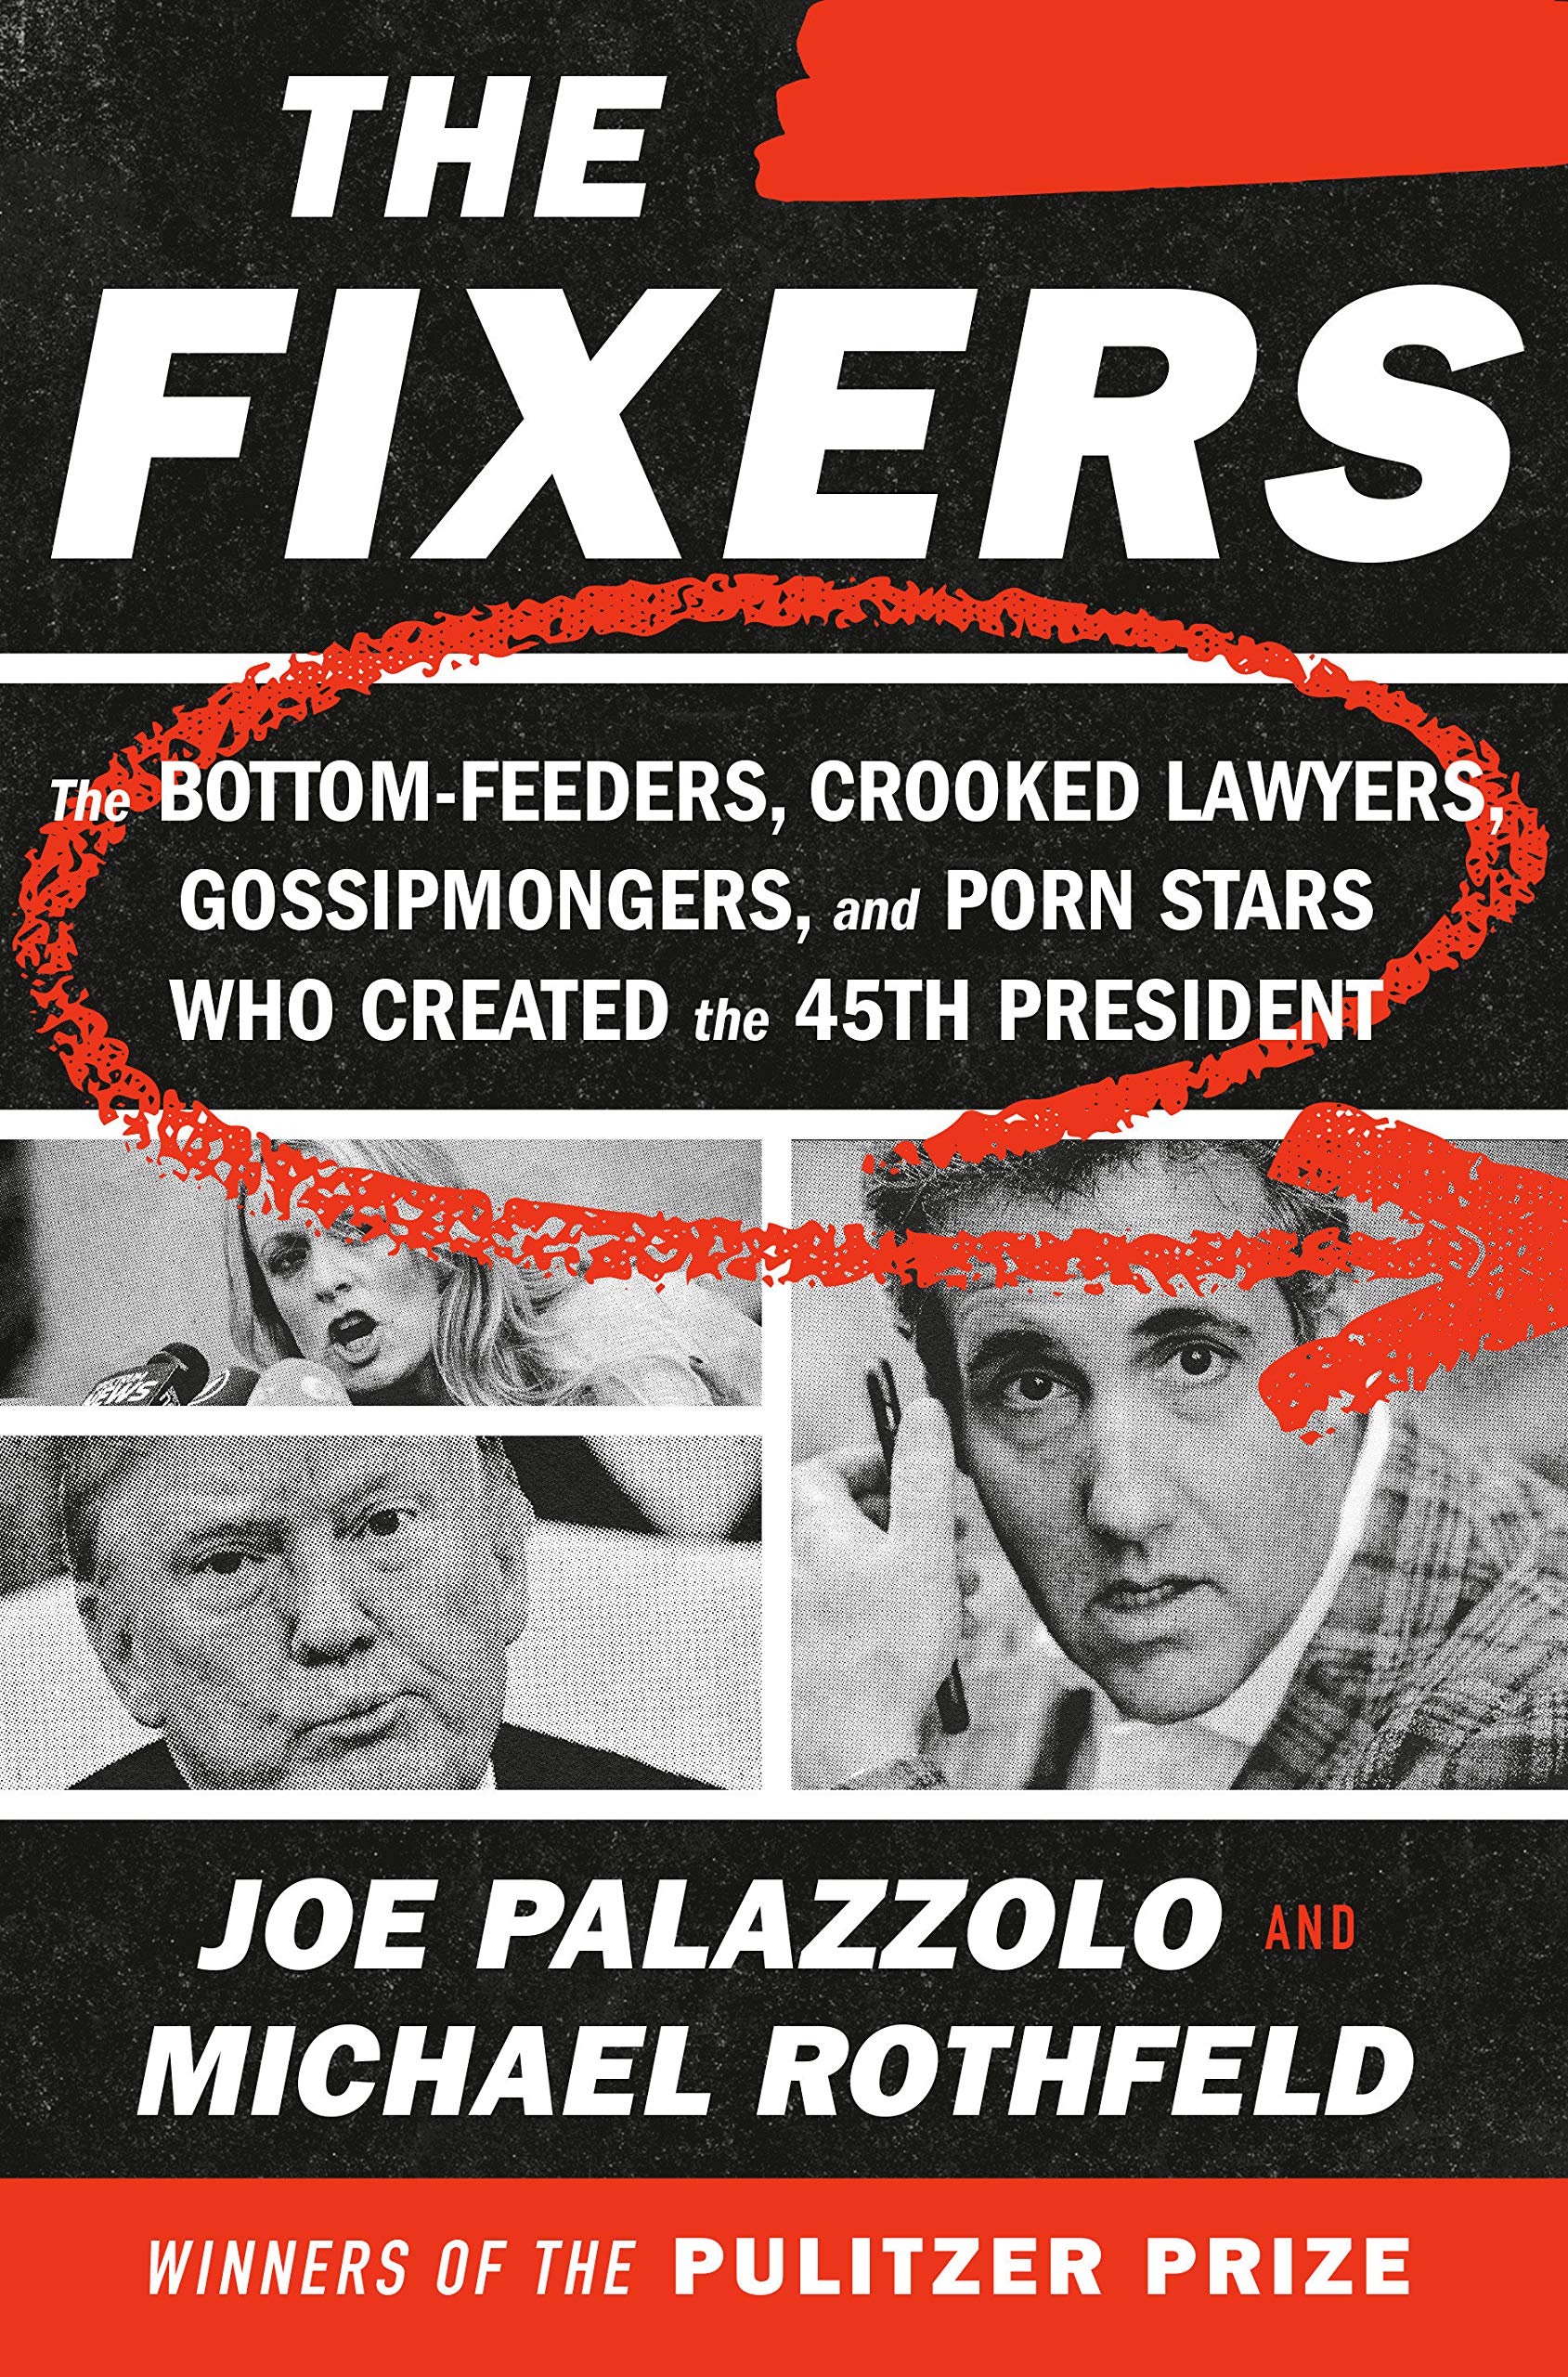 The Fixers: The Bottom-Feeders, Crooked Lawyers, Gossipmongers, and Porn Stars Who Created the 45th President